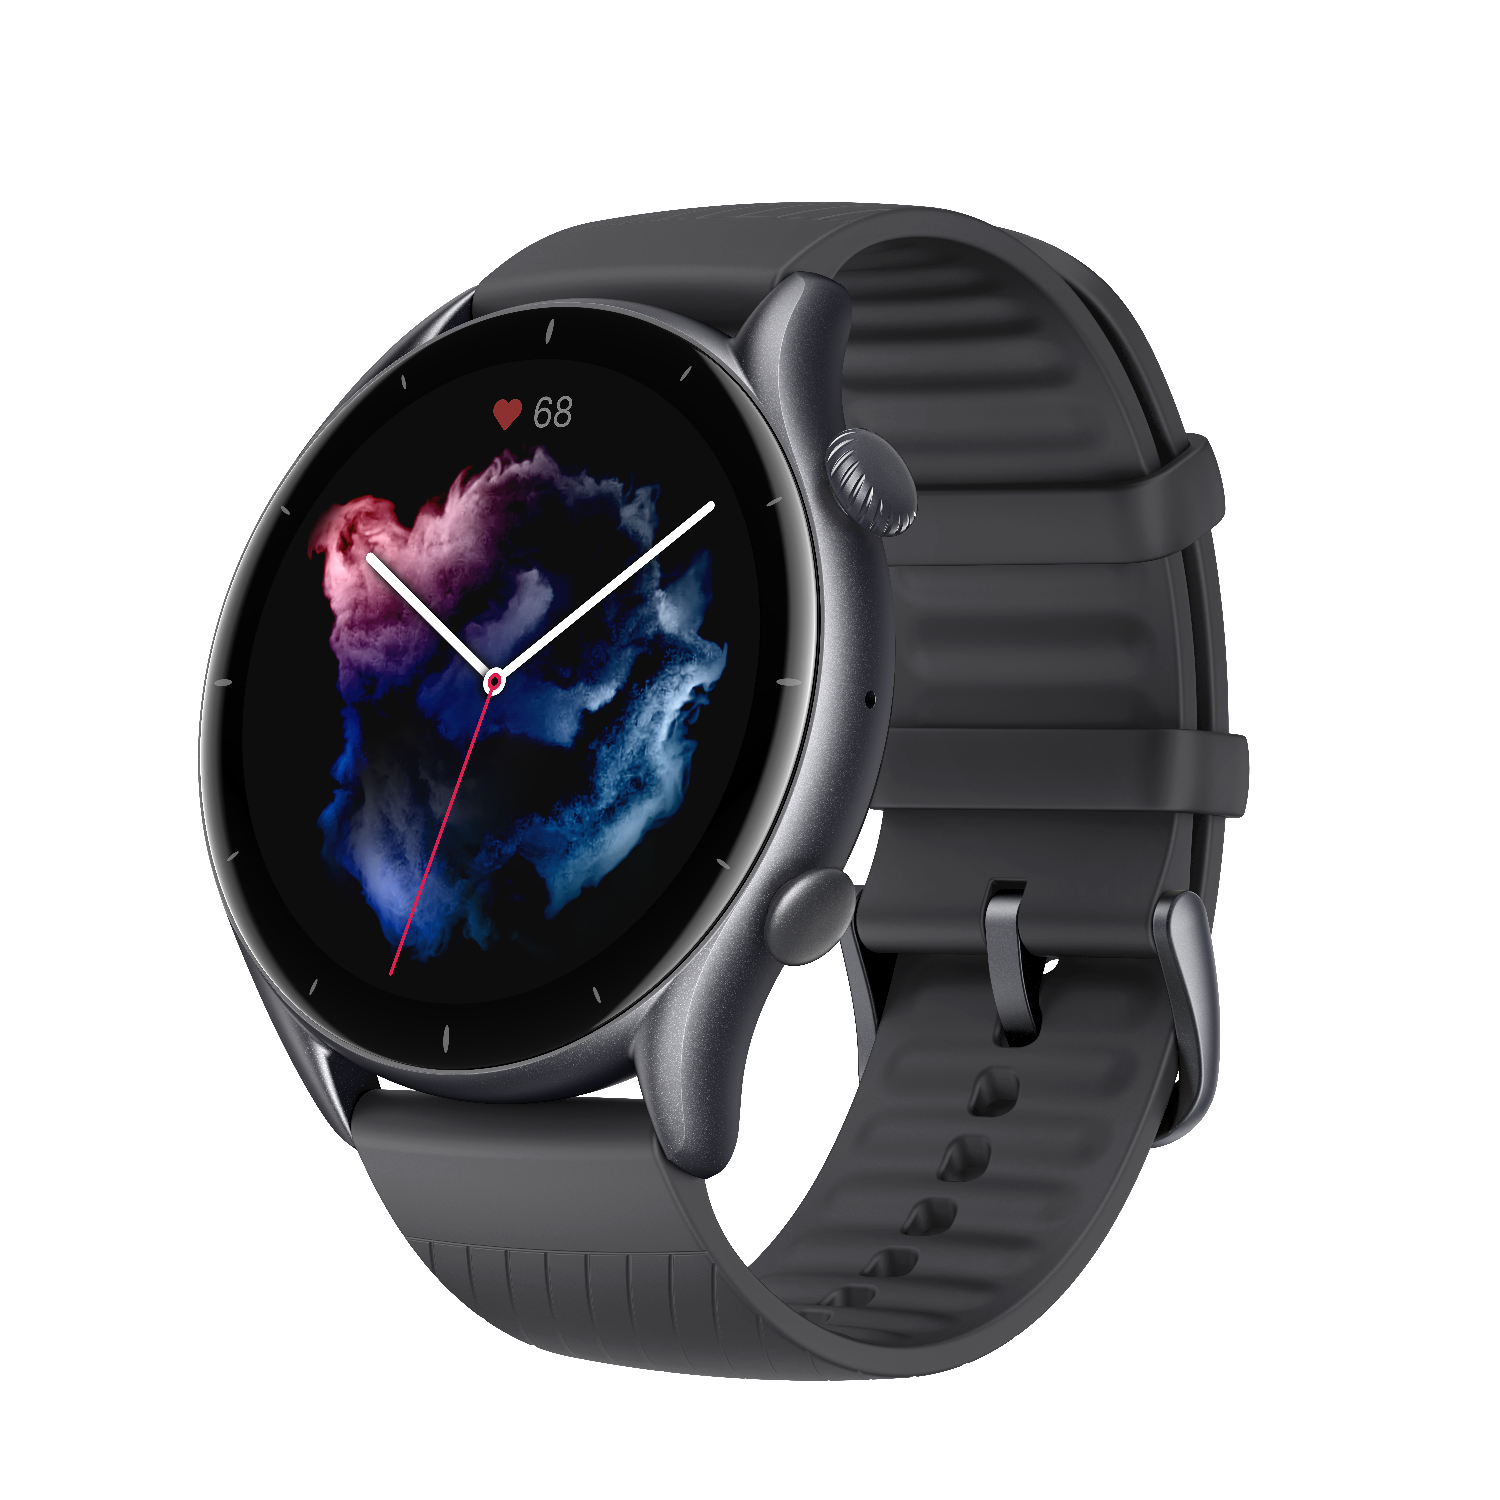 HUAWEI WATCH FIT 2 📢 UNBOXING y CONFIGURACION INICIAL 